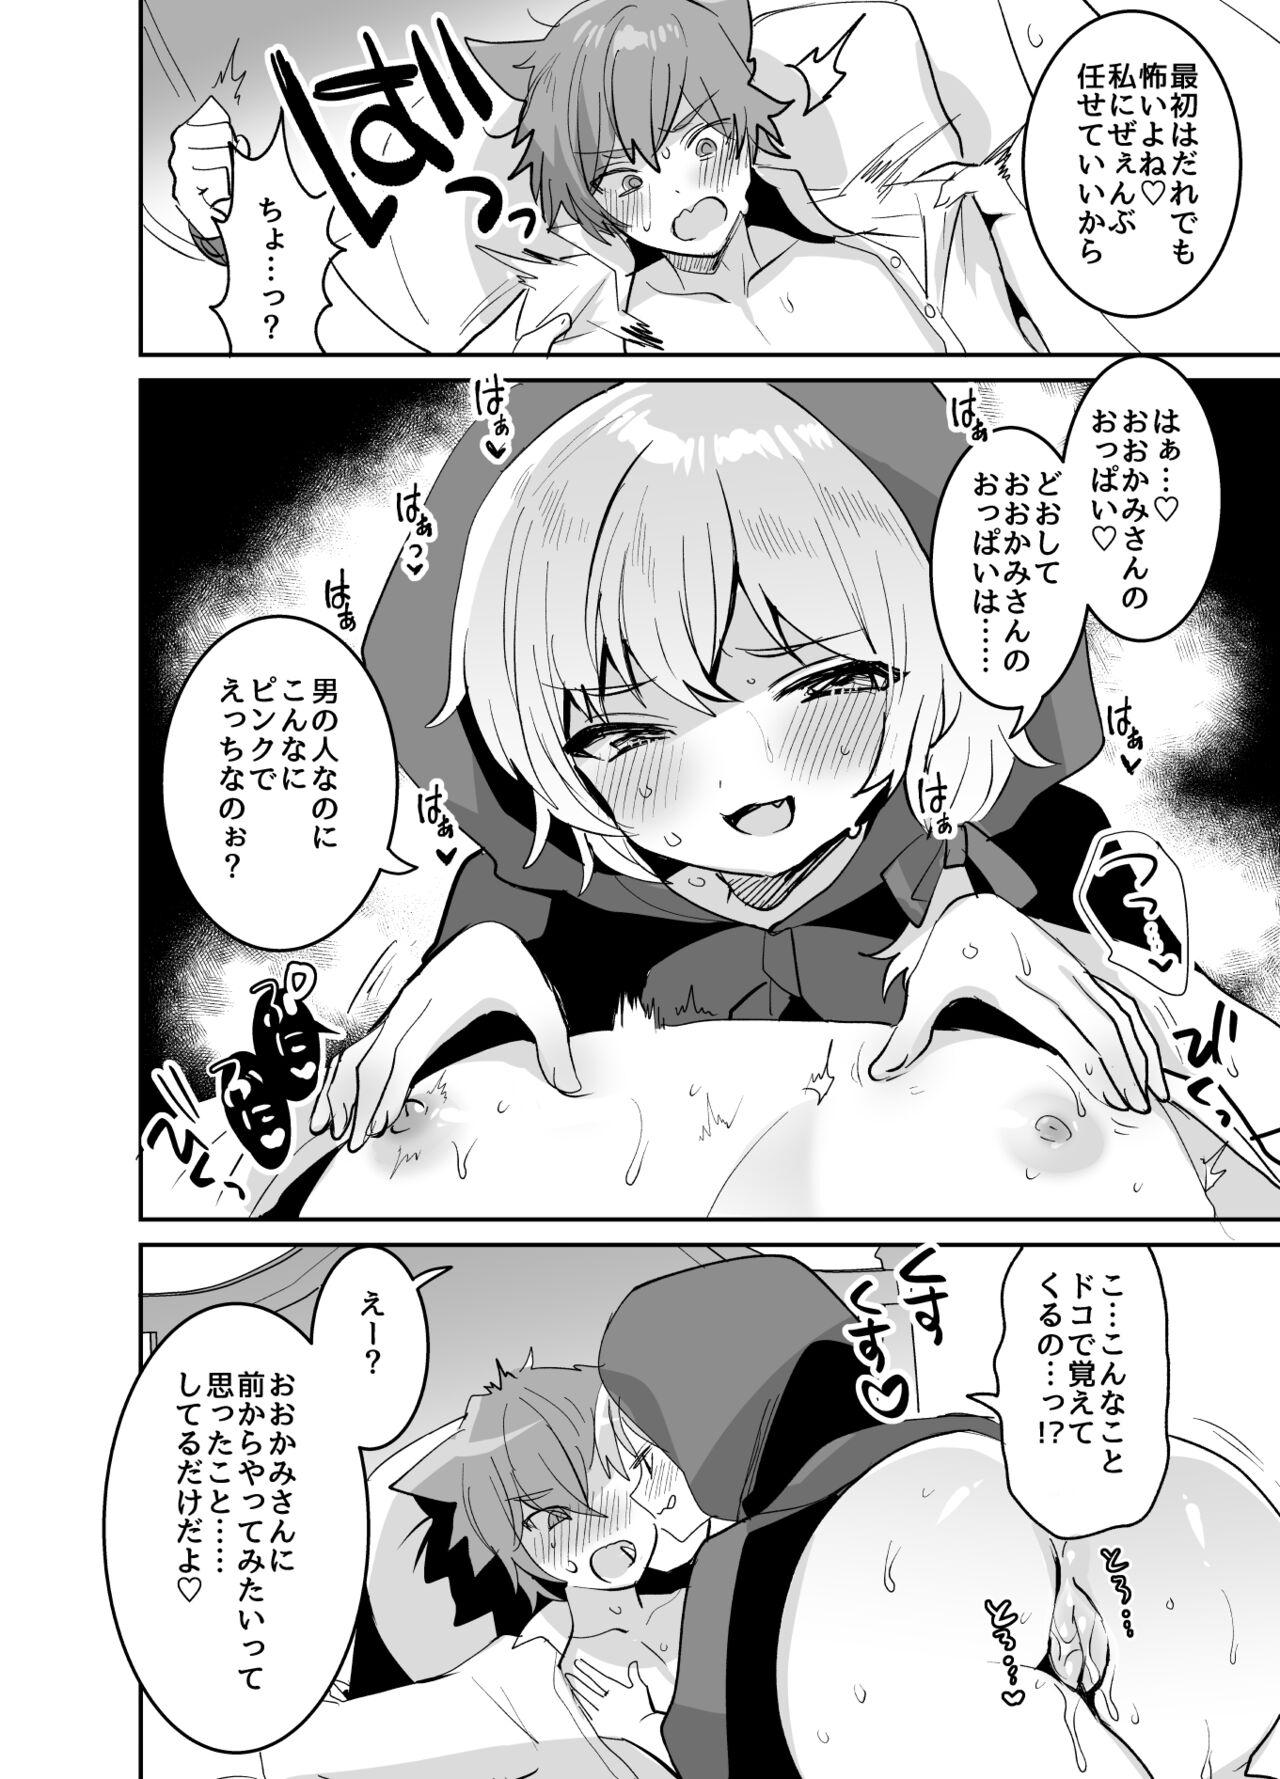 Camwhore 赤ずきんちゃんに犯される!! - Little red riding hood Indonesian - Page 11